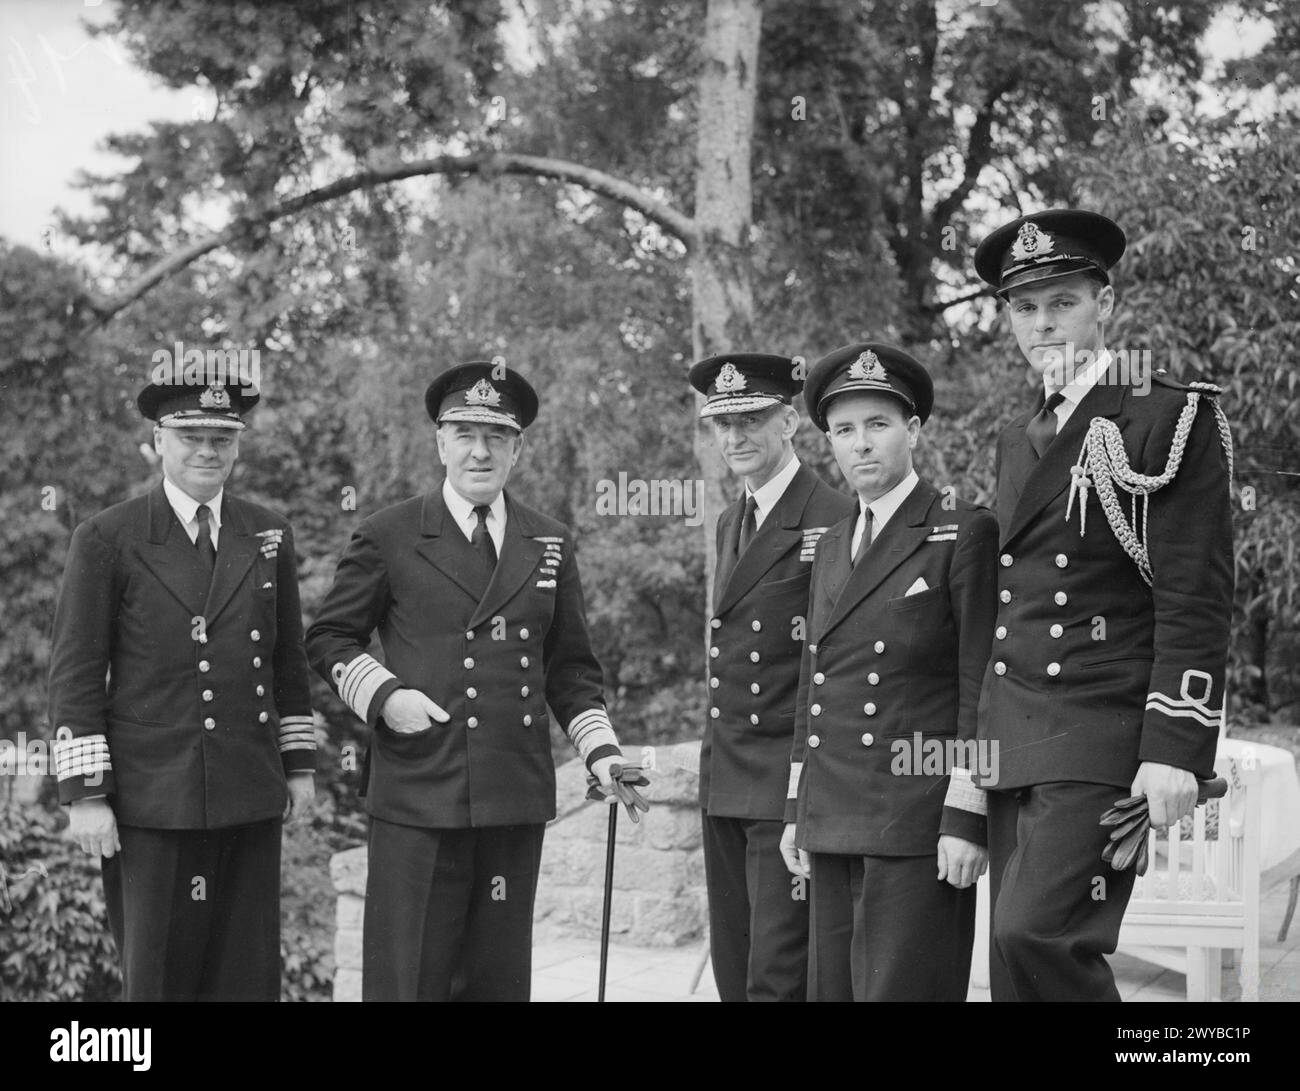 BRITISH NAVAL STAFF IN BERLIN, JULY 1945. - Left to right: Captain G O Maud, DSO, DSC, RN; Admiral Sir Harold Burrough, KCB, KBE, DSO, British Naval C in C Germany; Rear Admiral W E Parry, CB; Captain (S) Ellerton, DSC, RN; and the Flag Lieutenant. , Stock Photo